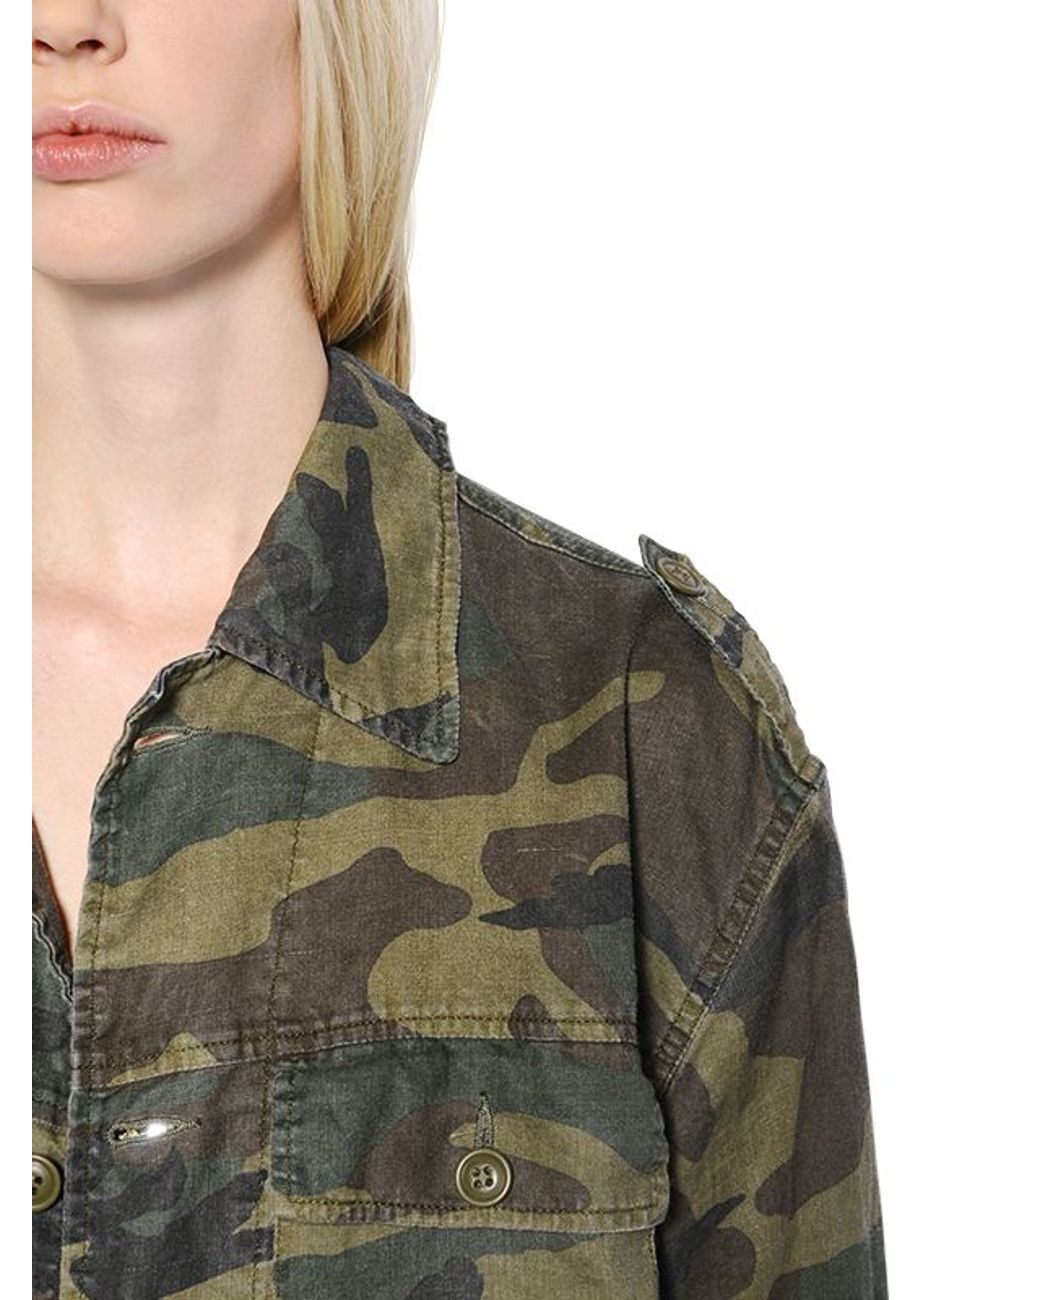 Saint Laurent Camo Printed Light Canvas Jacket in Green | Lyst